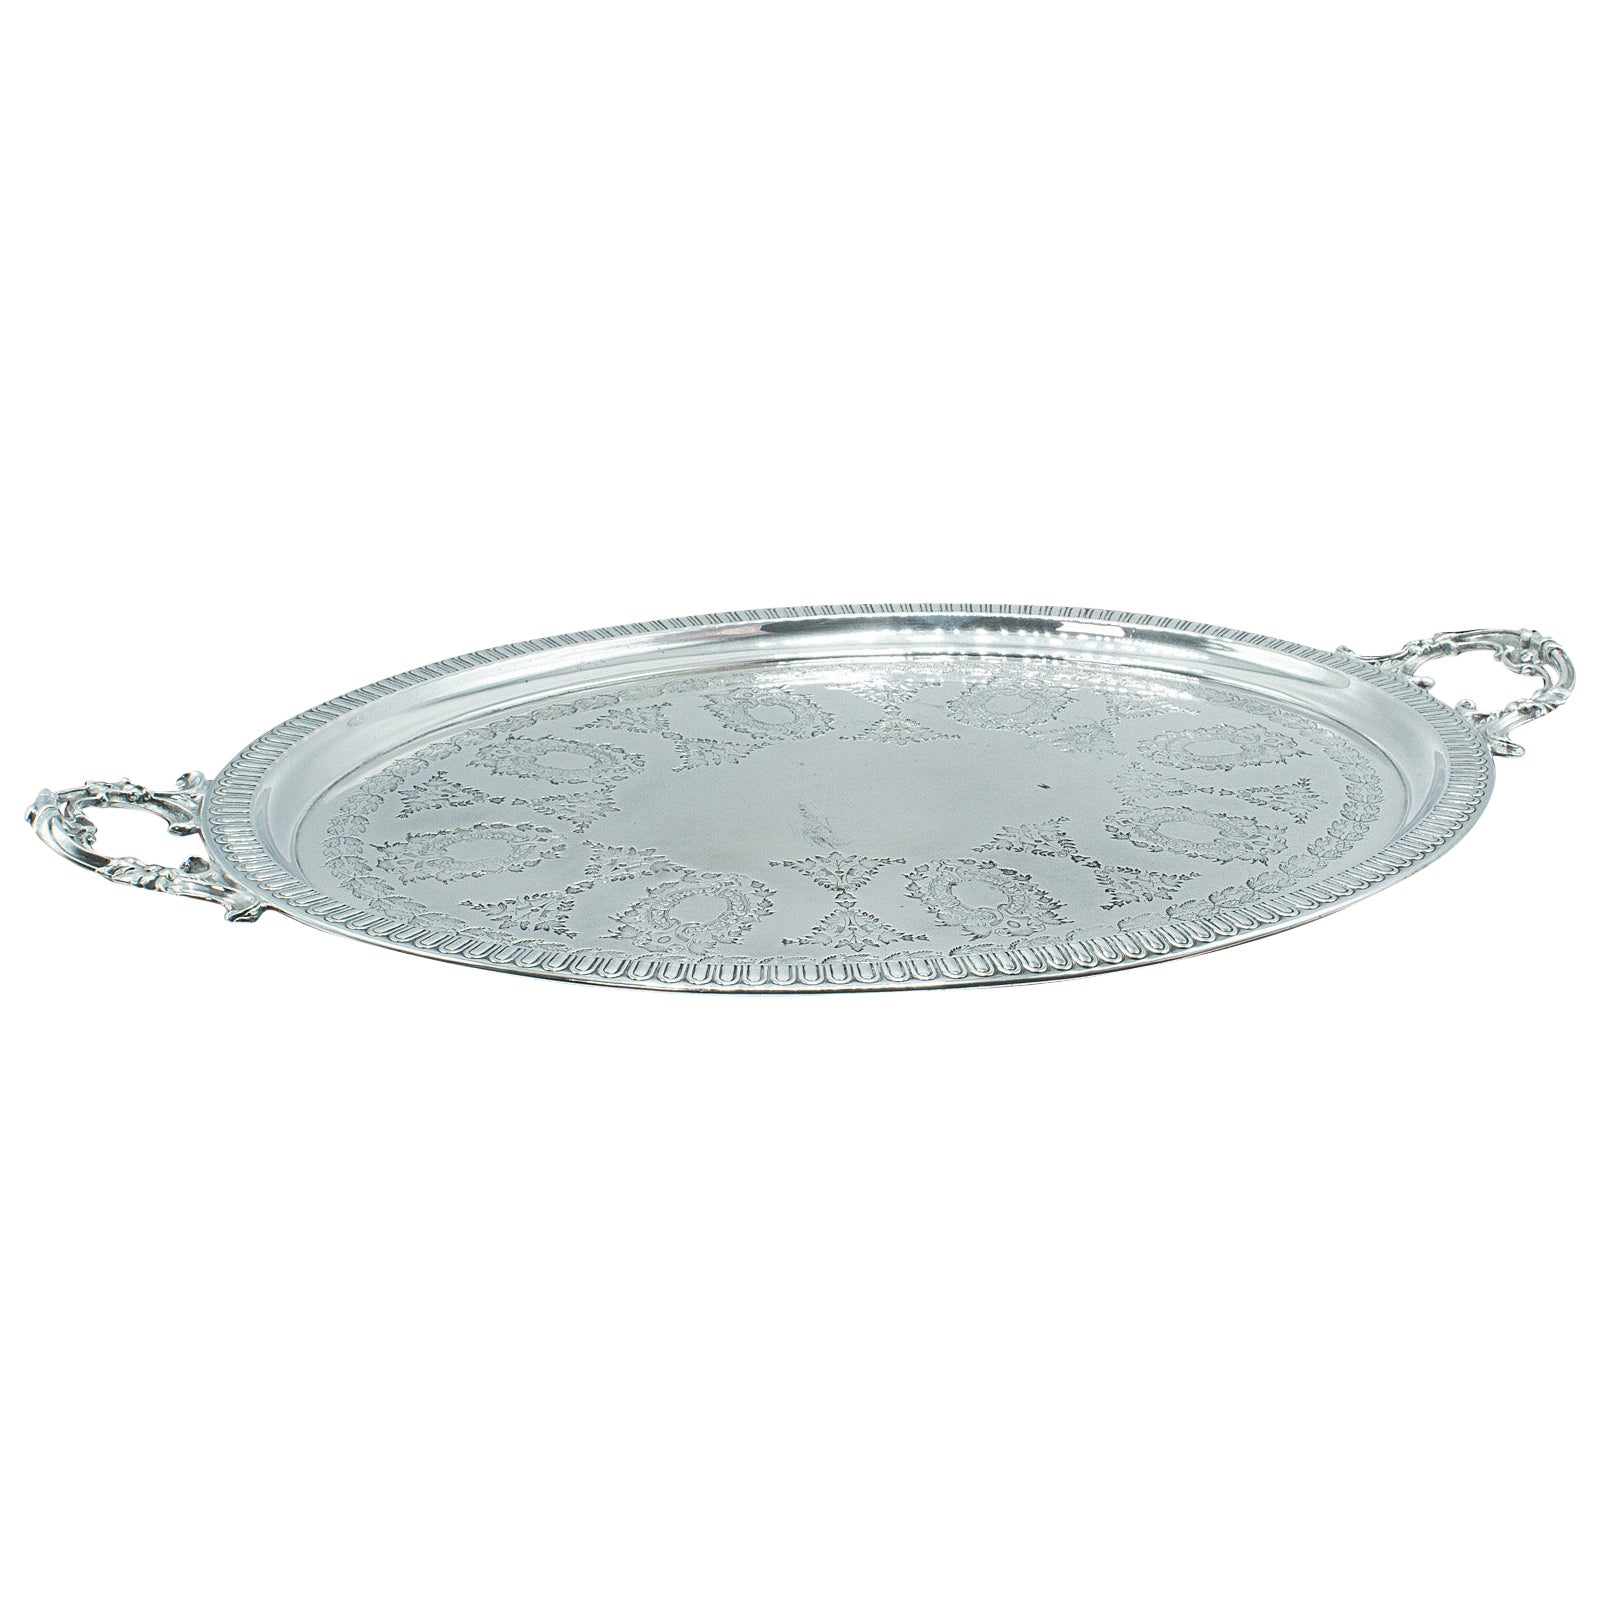 Antique Oval Decorative Serving Tray, English, Silver Plate, Afternoon Tea, 1910 For Sale